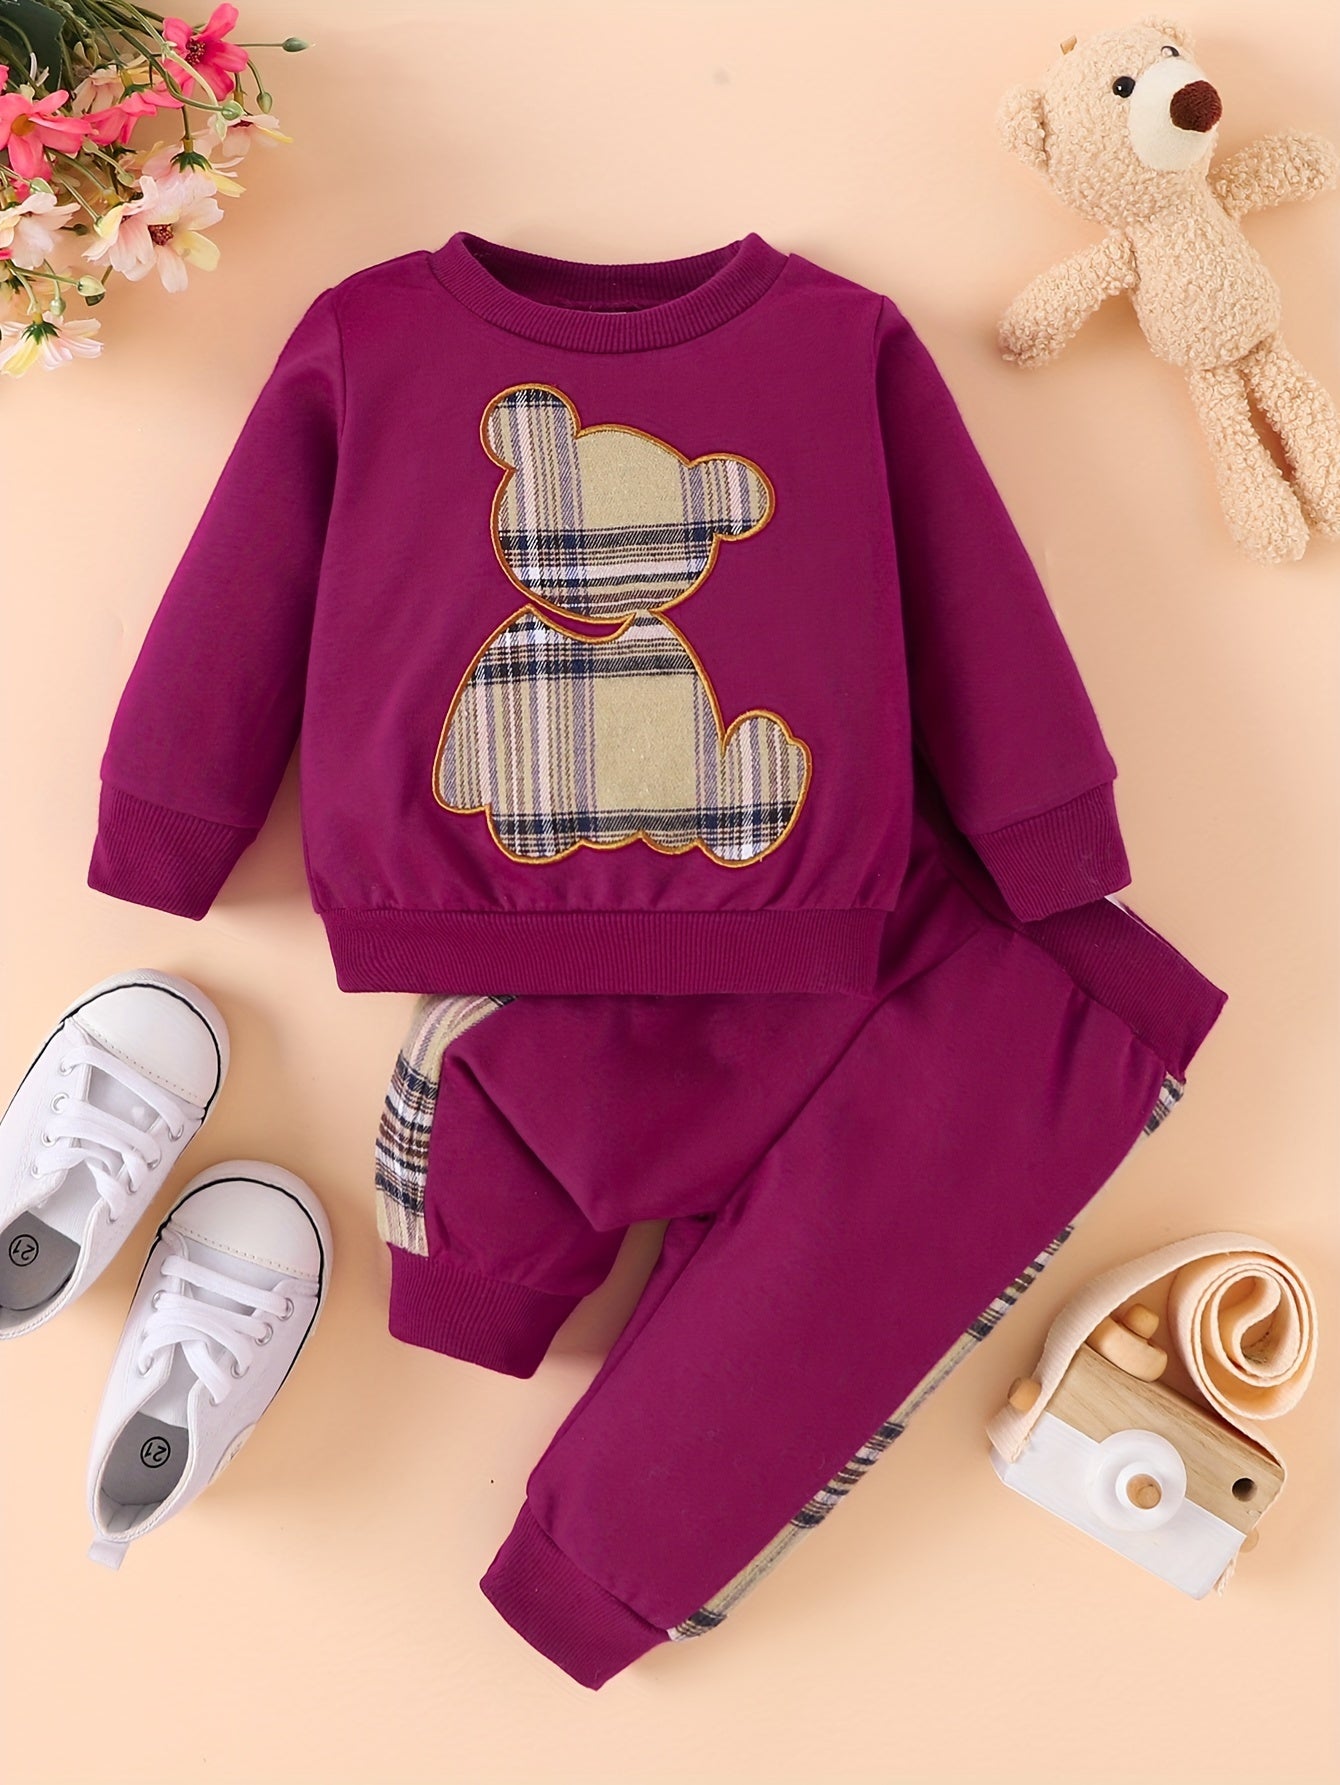 Toddler Baby Boy Clothes Set Long Sleeve Sweatshirt Top Casual Pants Fall Winter Outfit Sweatsuit